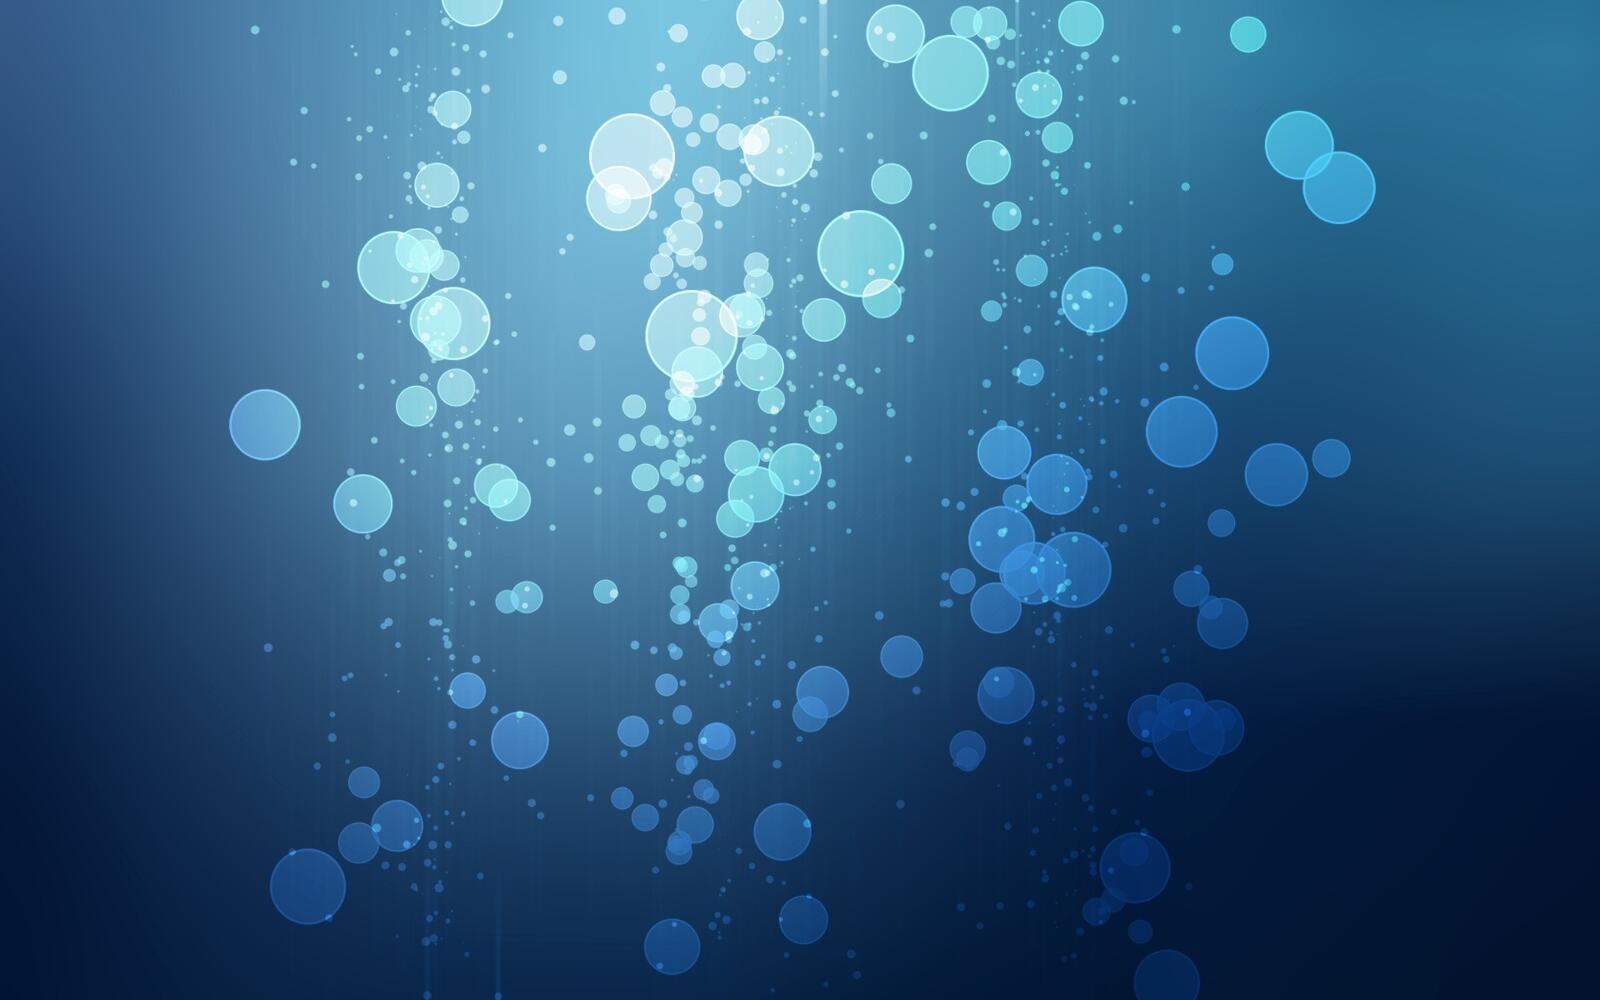 Free photo Picture with abstract bubbles in blue color